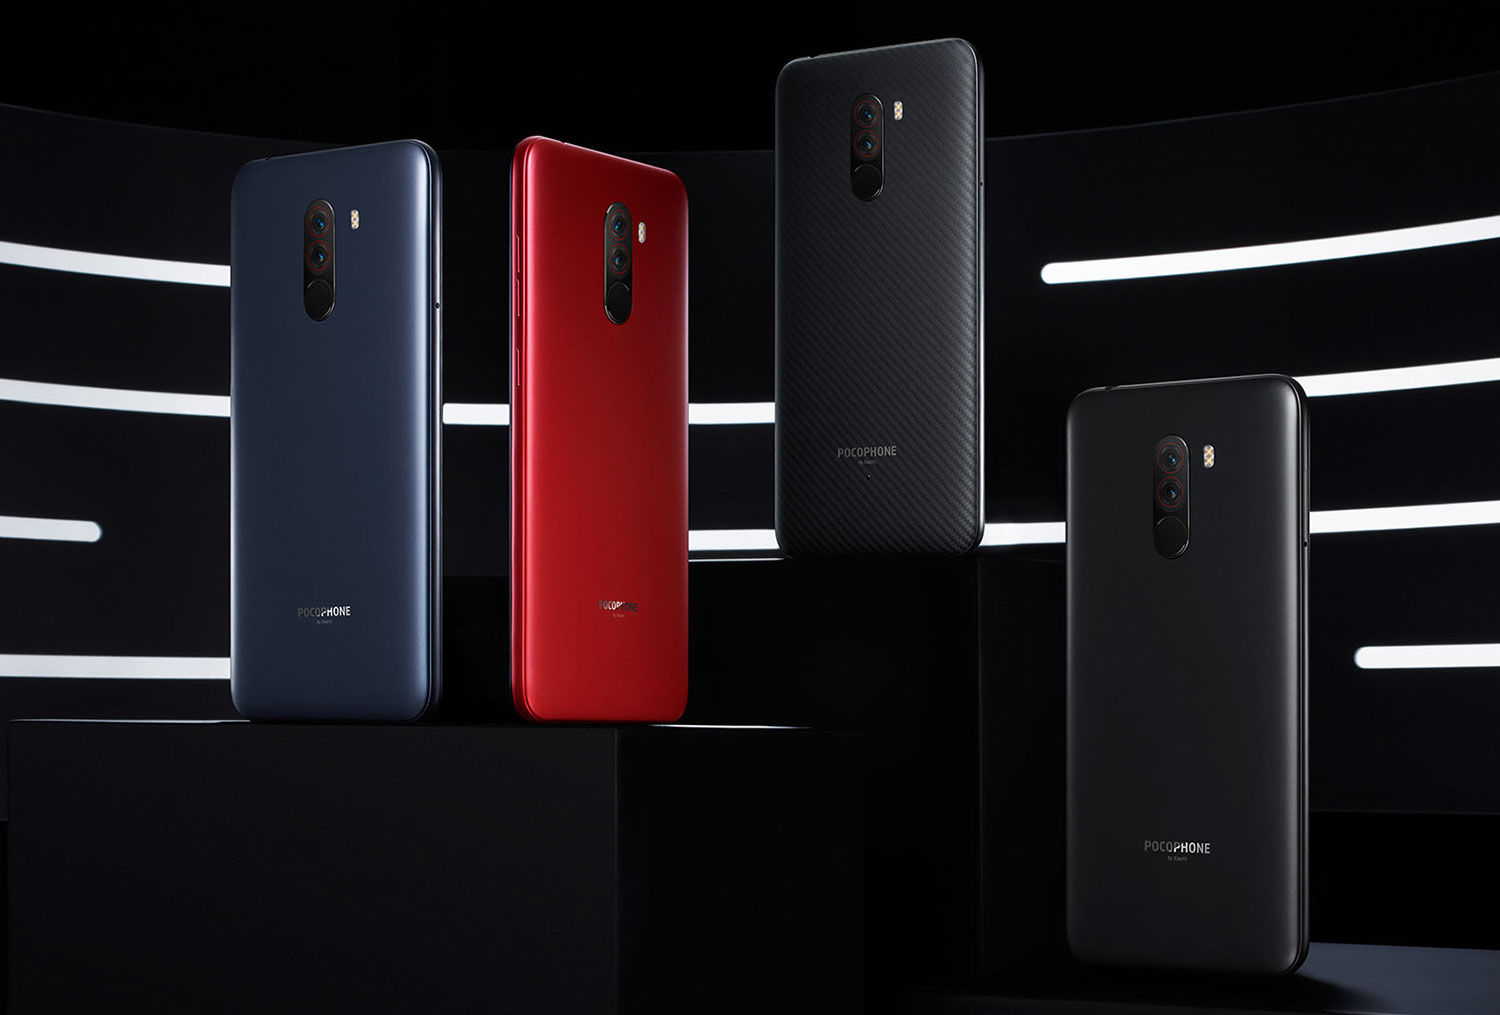 POCOPHONE F1 Retails from RM1,237, Available on August 30